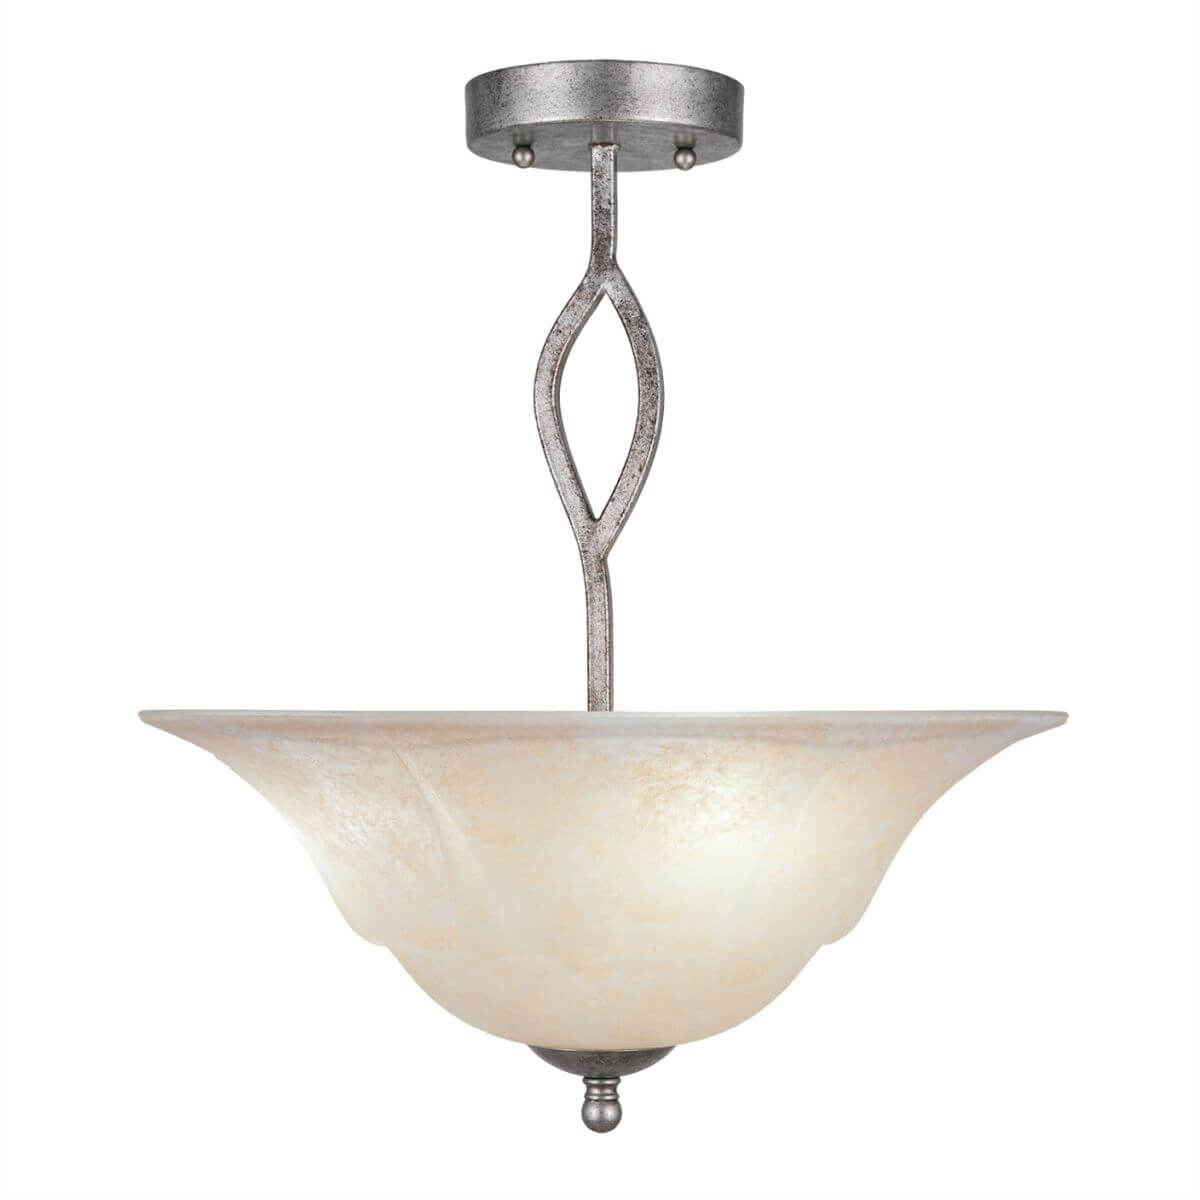 Toltec Lighting 242-AS-53613 Revo 3 Light 16 inch Semi-Flush Mount in Aged Silver with 16 inch Amber Marble Glass